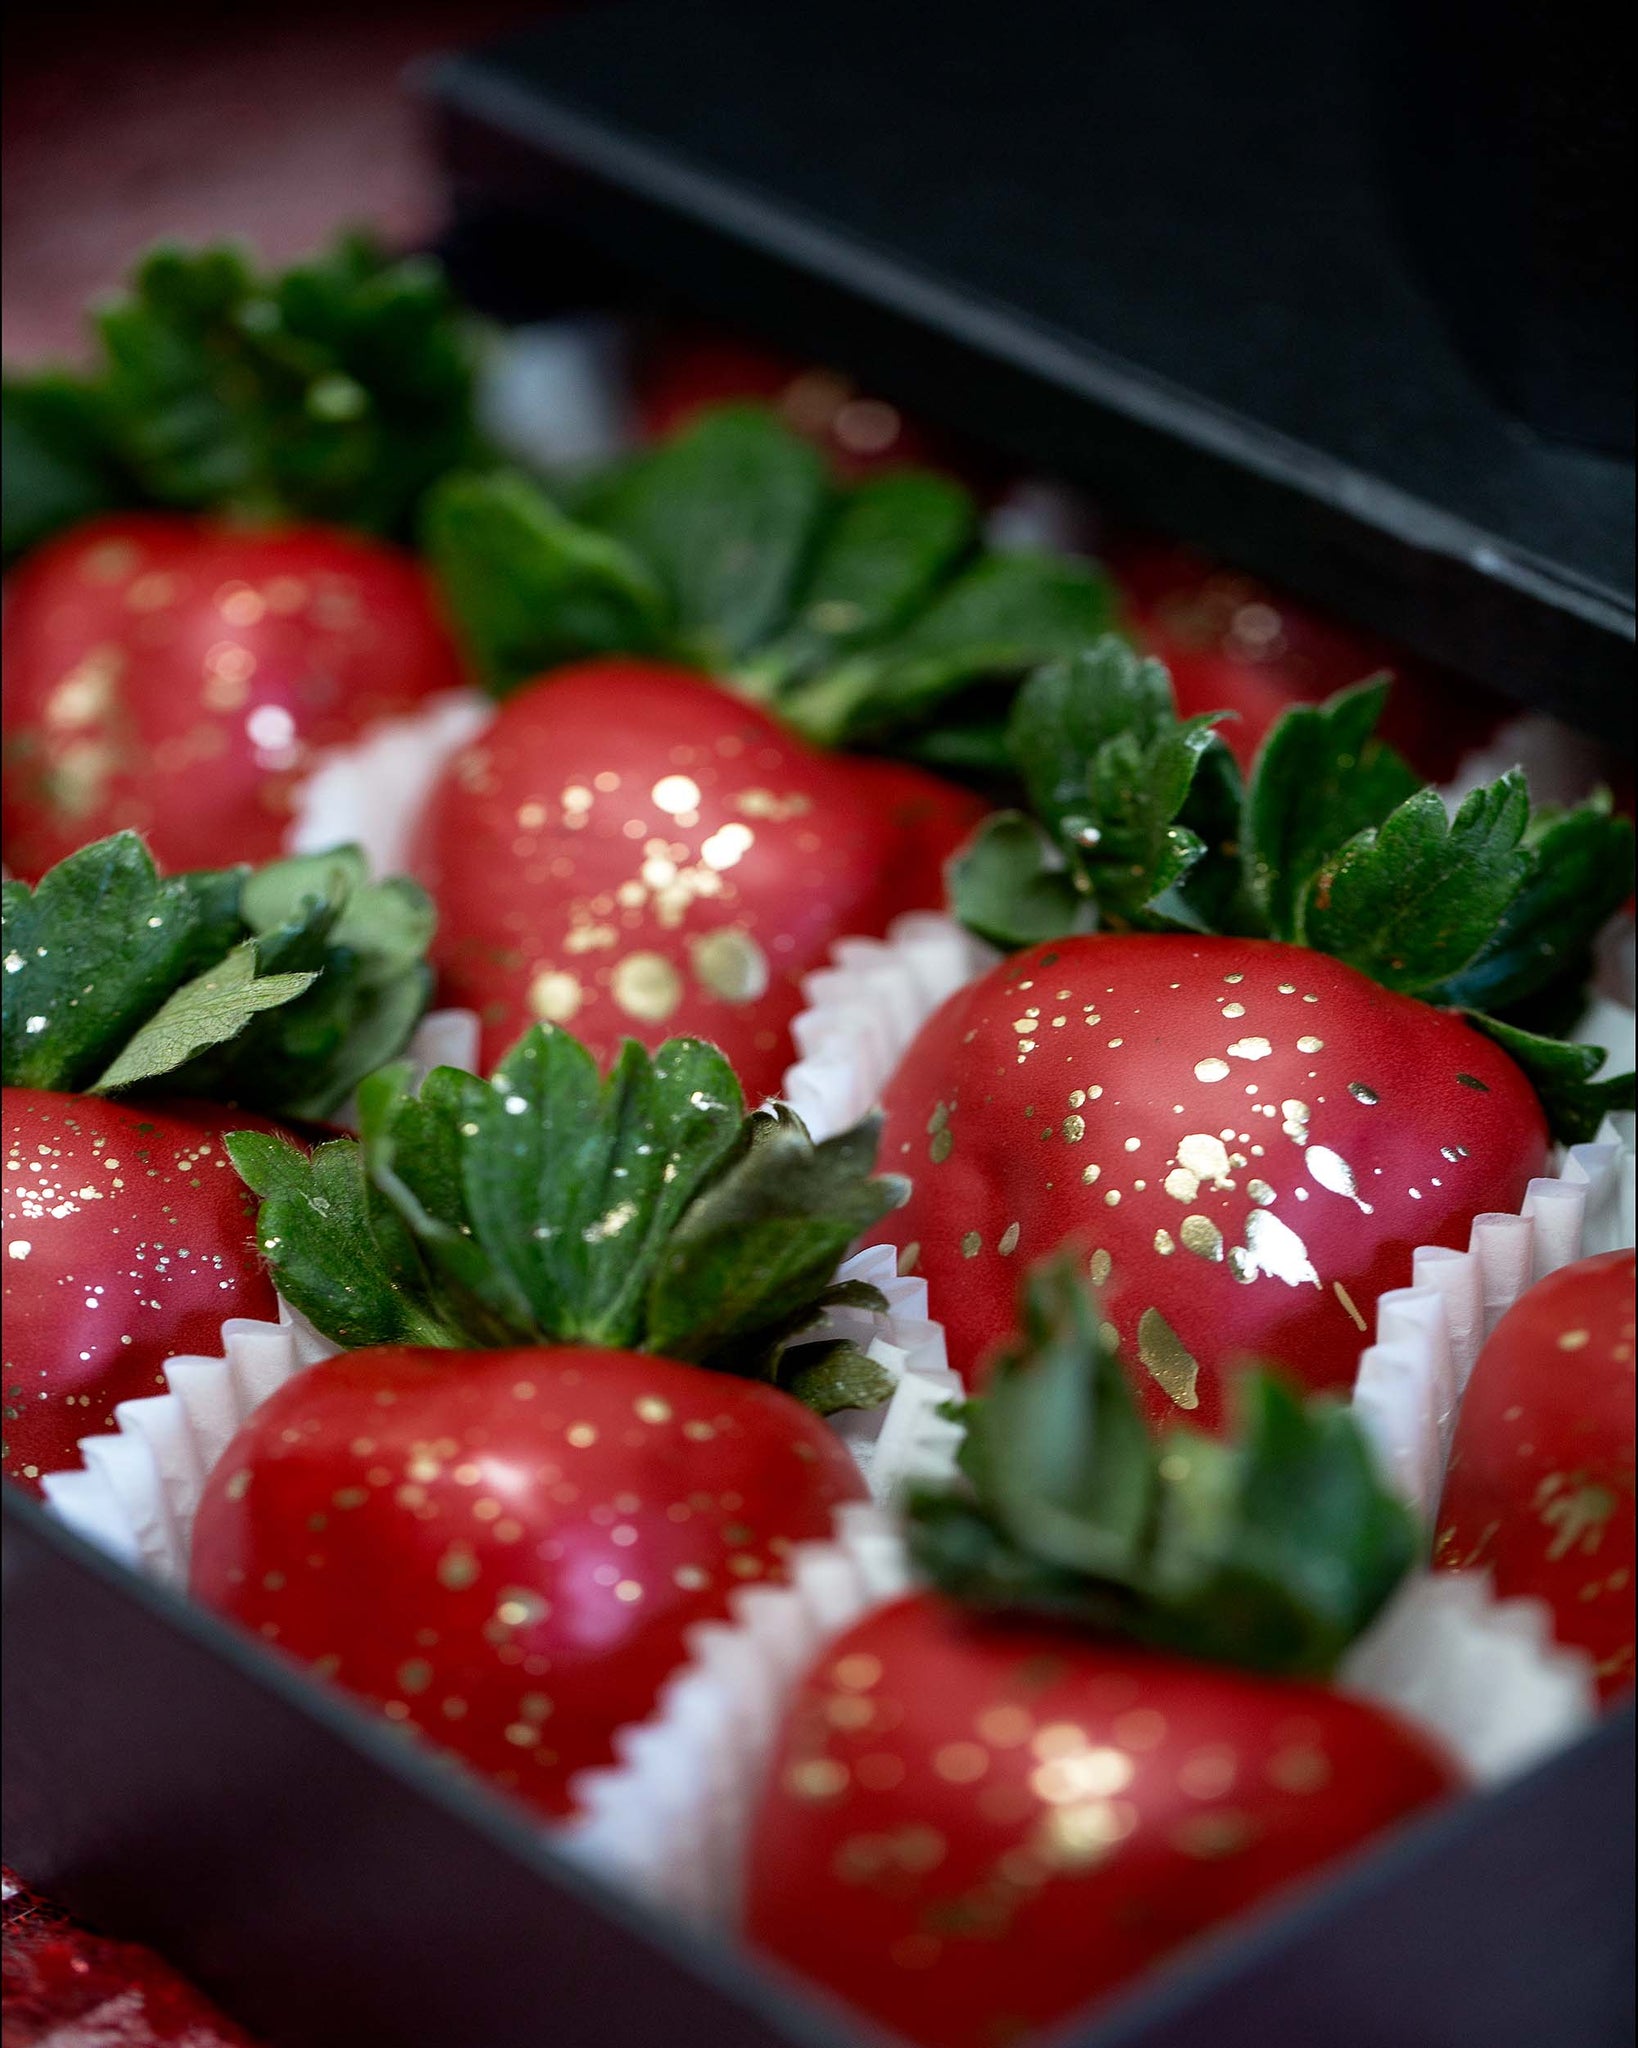 Splatter Chocolate Covered Strawberries – Chocolate Place